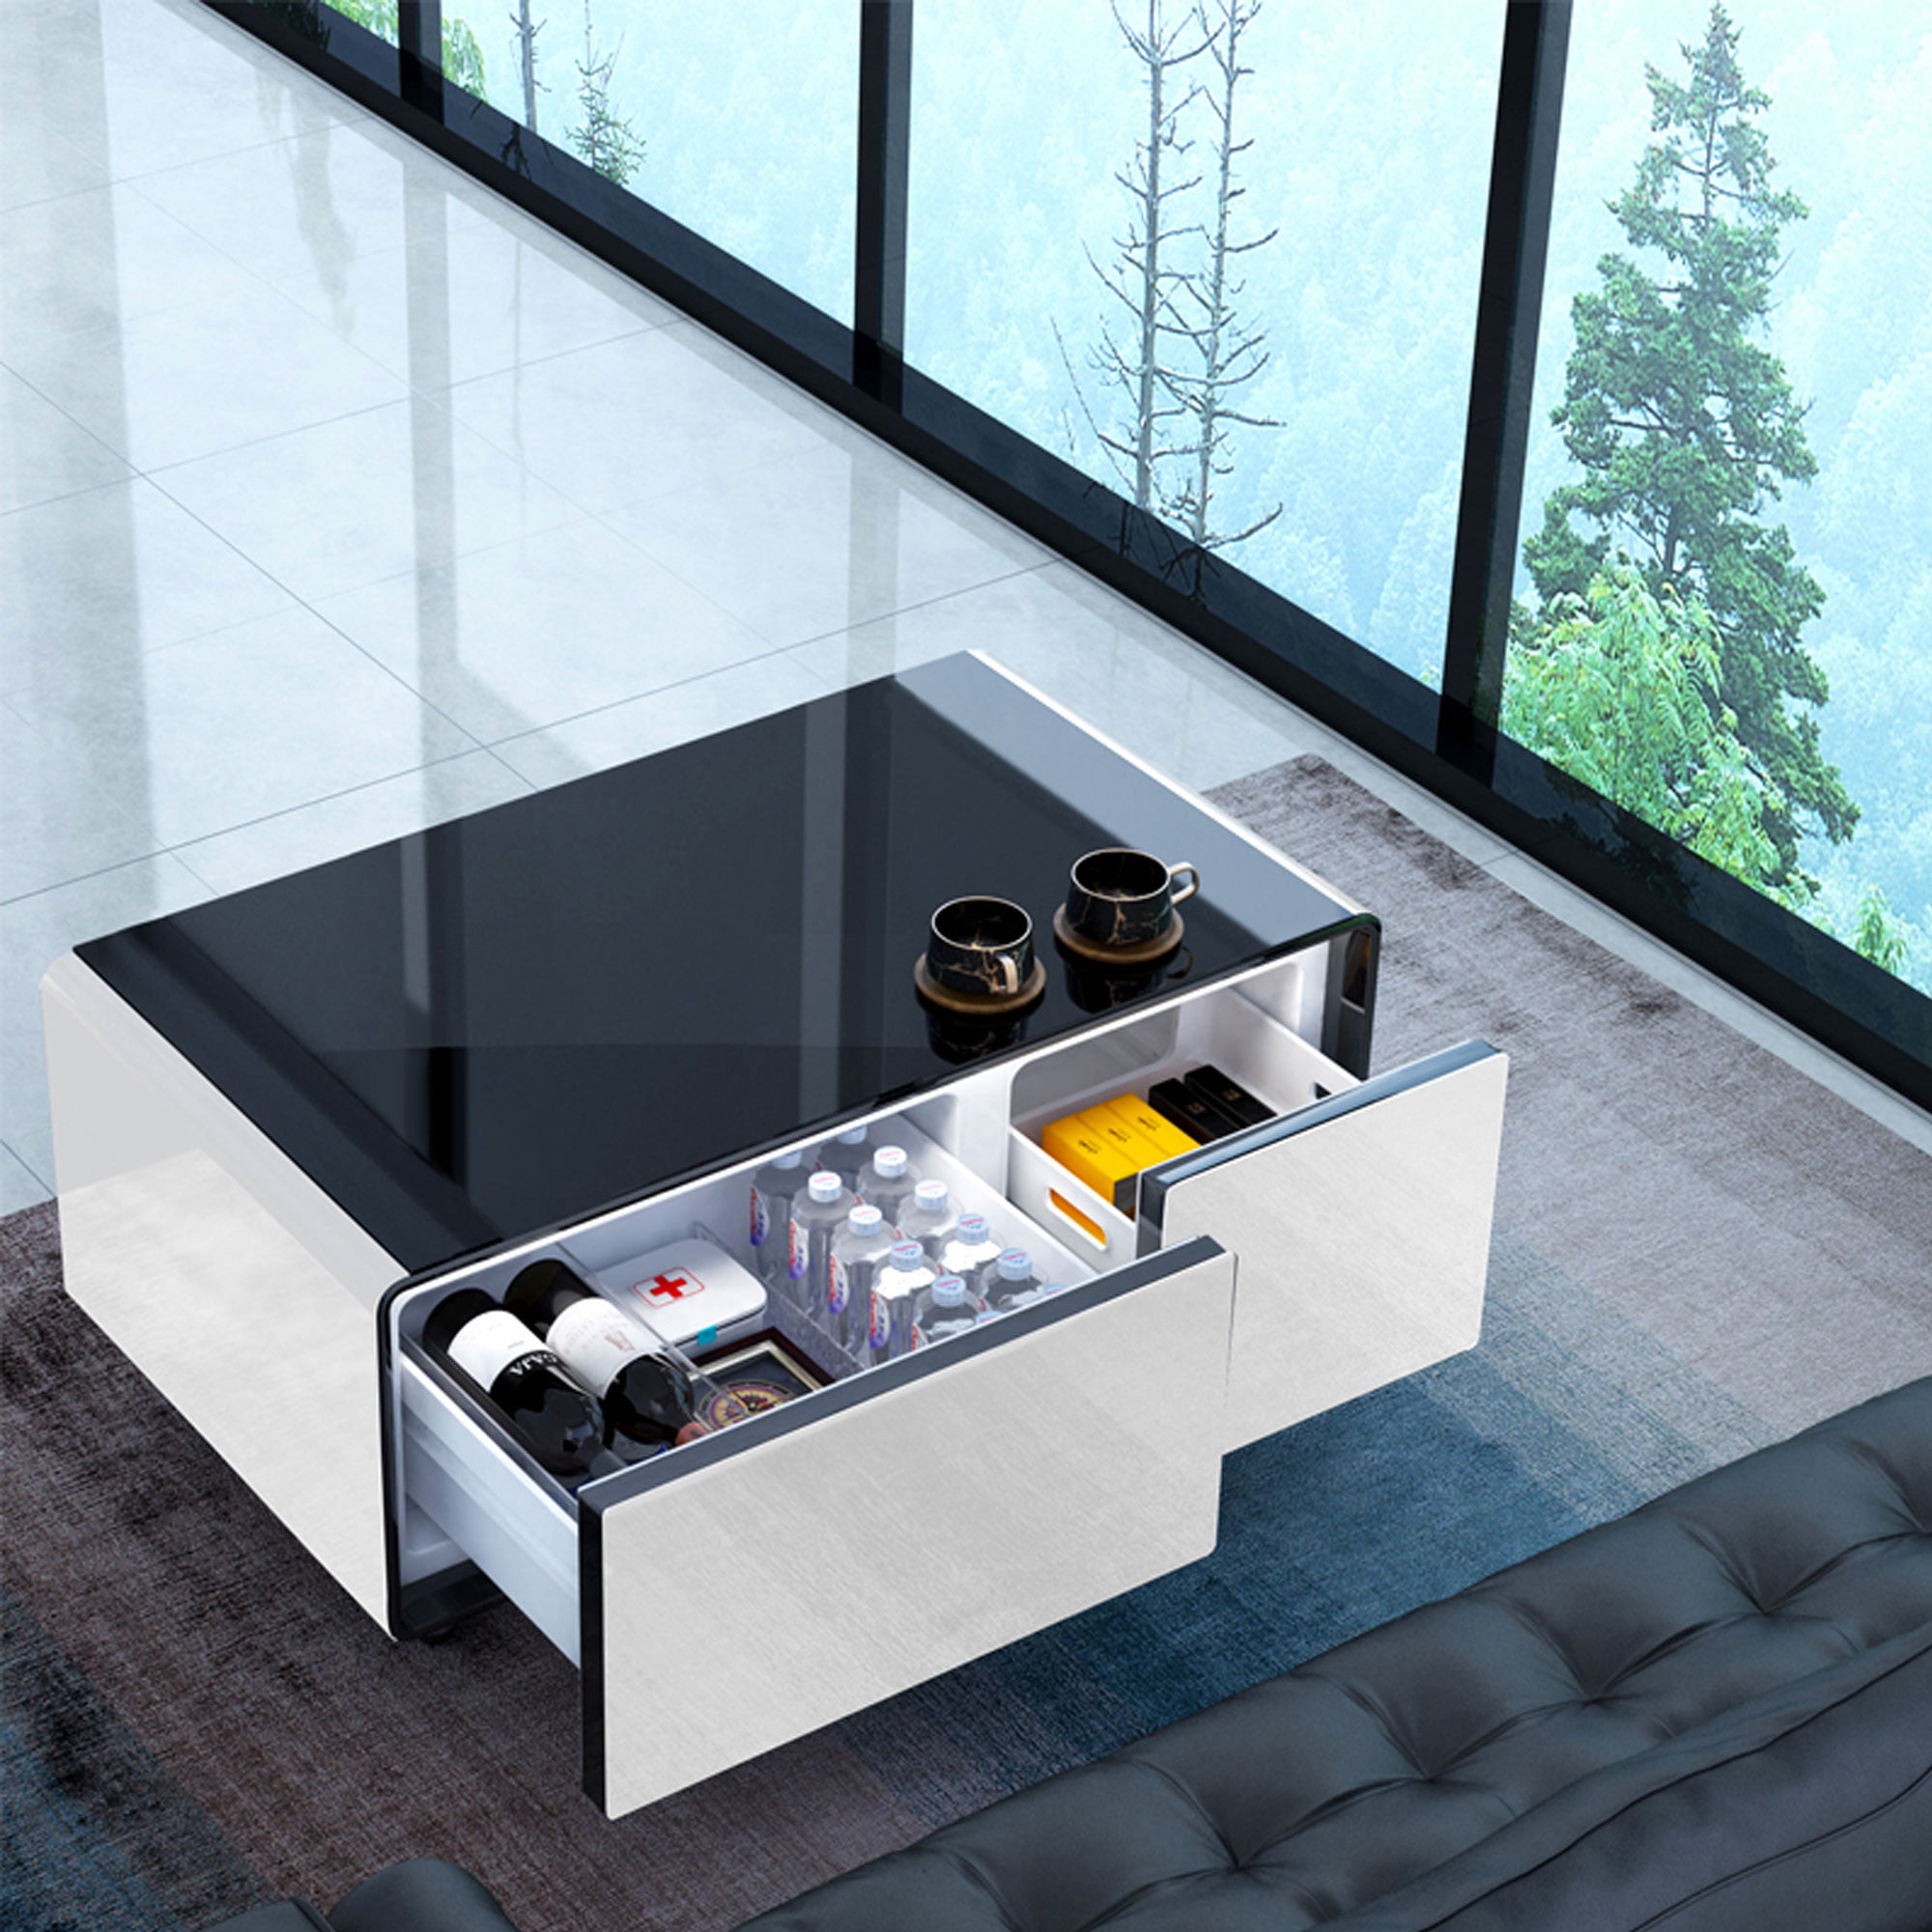 Sobro Smart Storage Coffee Table With Refrigerated Drawer